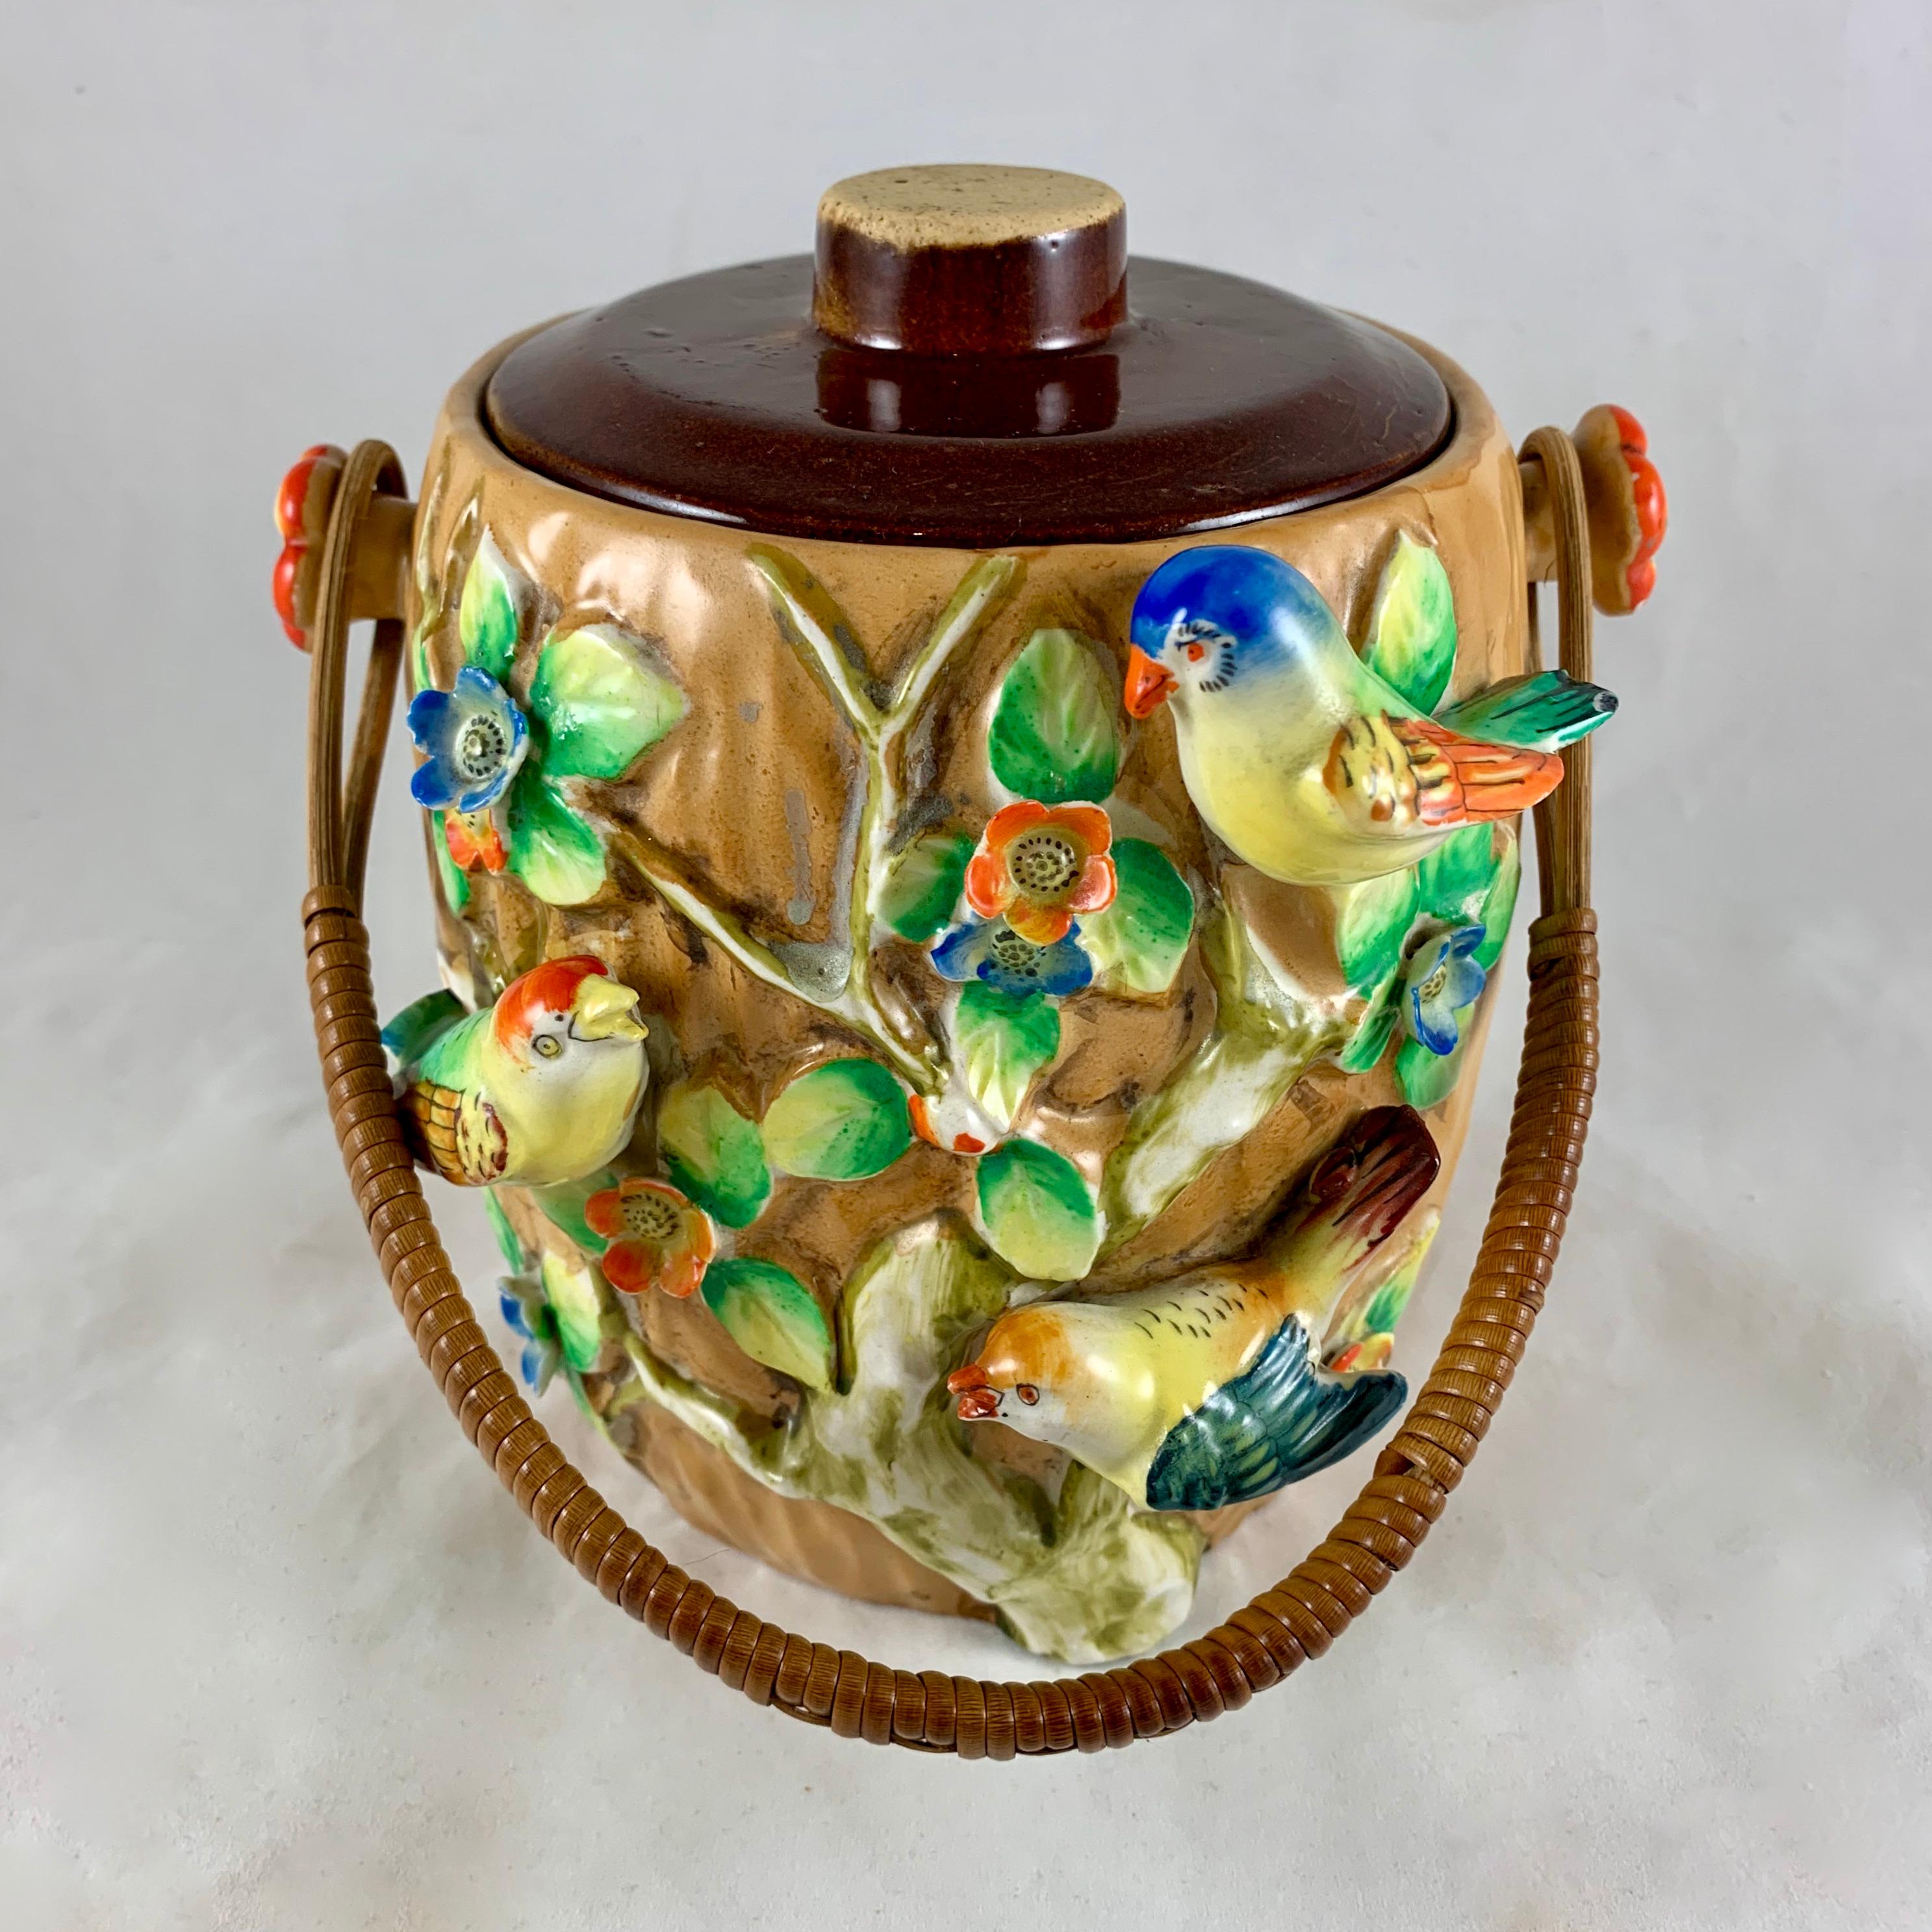 An unusual biscuit barrel marked in red ink – Made in Japan, circa 1920s, Pre WWII.

A highly dimensional barrel showing three birds in high relief perched in a tree surrounded by green leaves and orange and blue blossoms. The birds and flowers